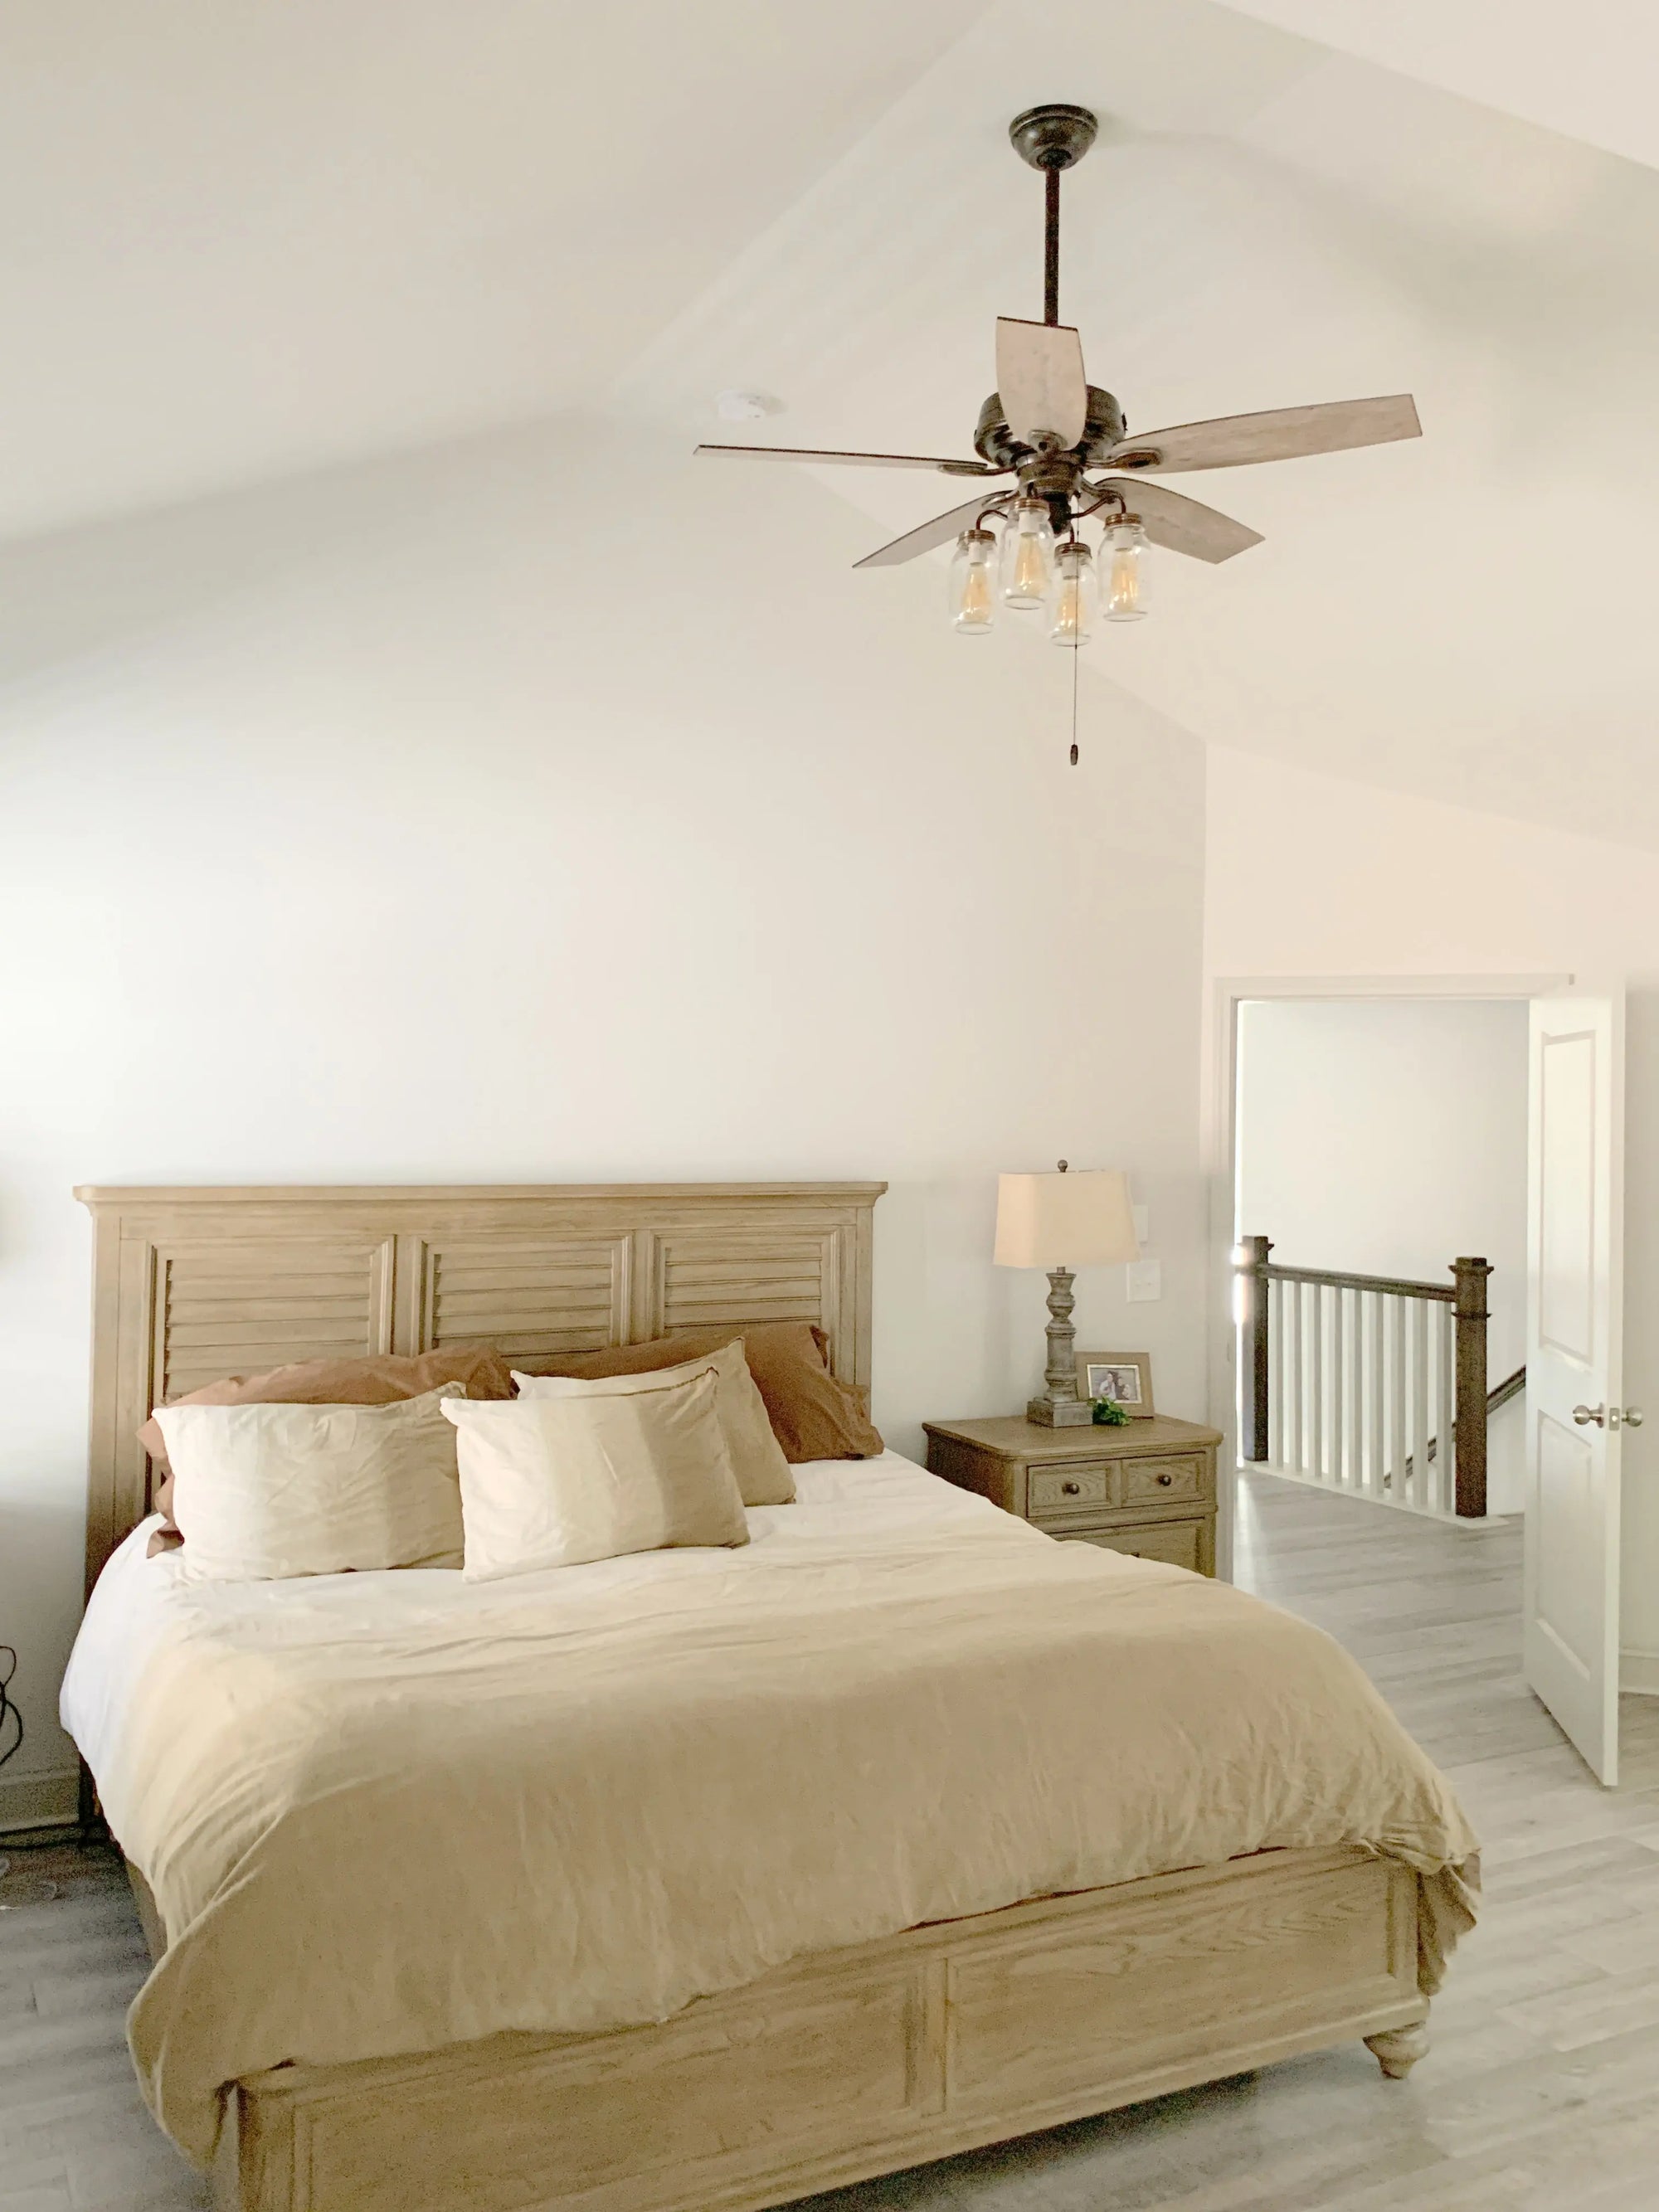 How to Upgrade a Ceiling Fan